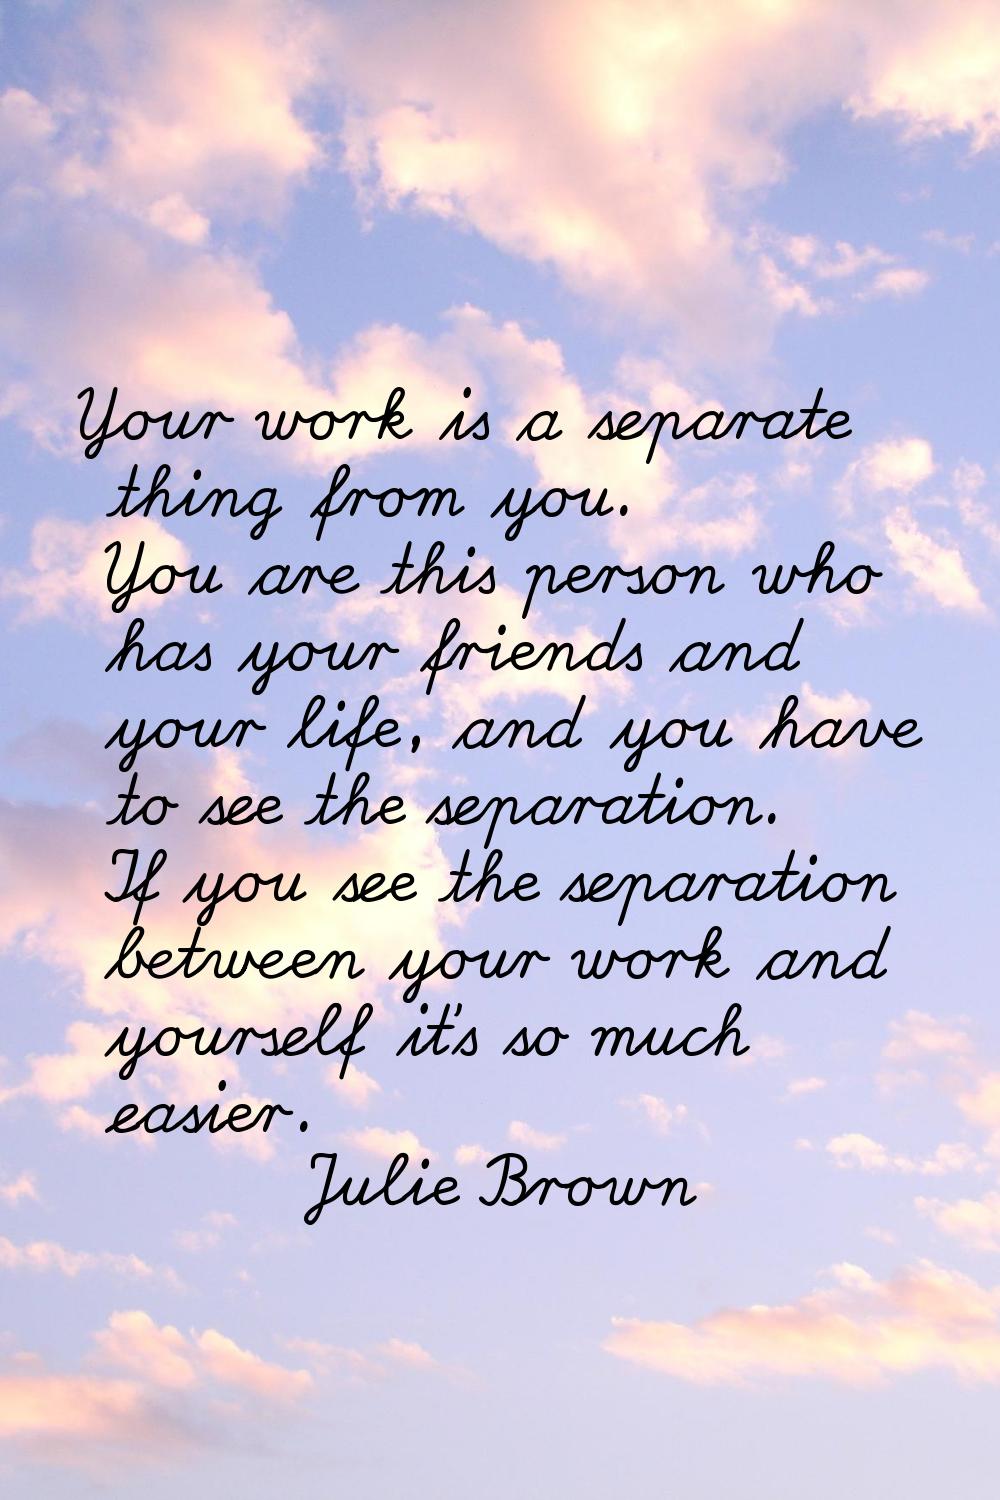 Your work is a separate thing from you. You are this person who has your friends and your life, and